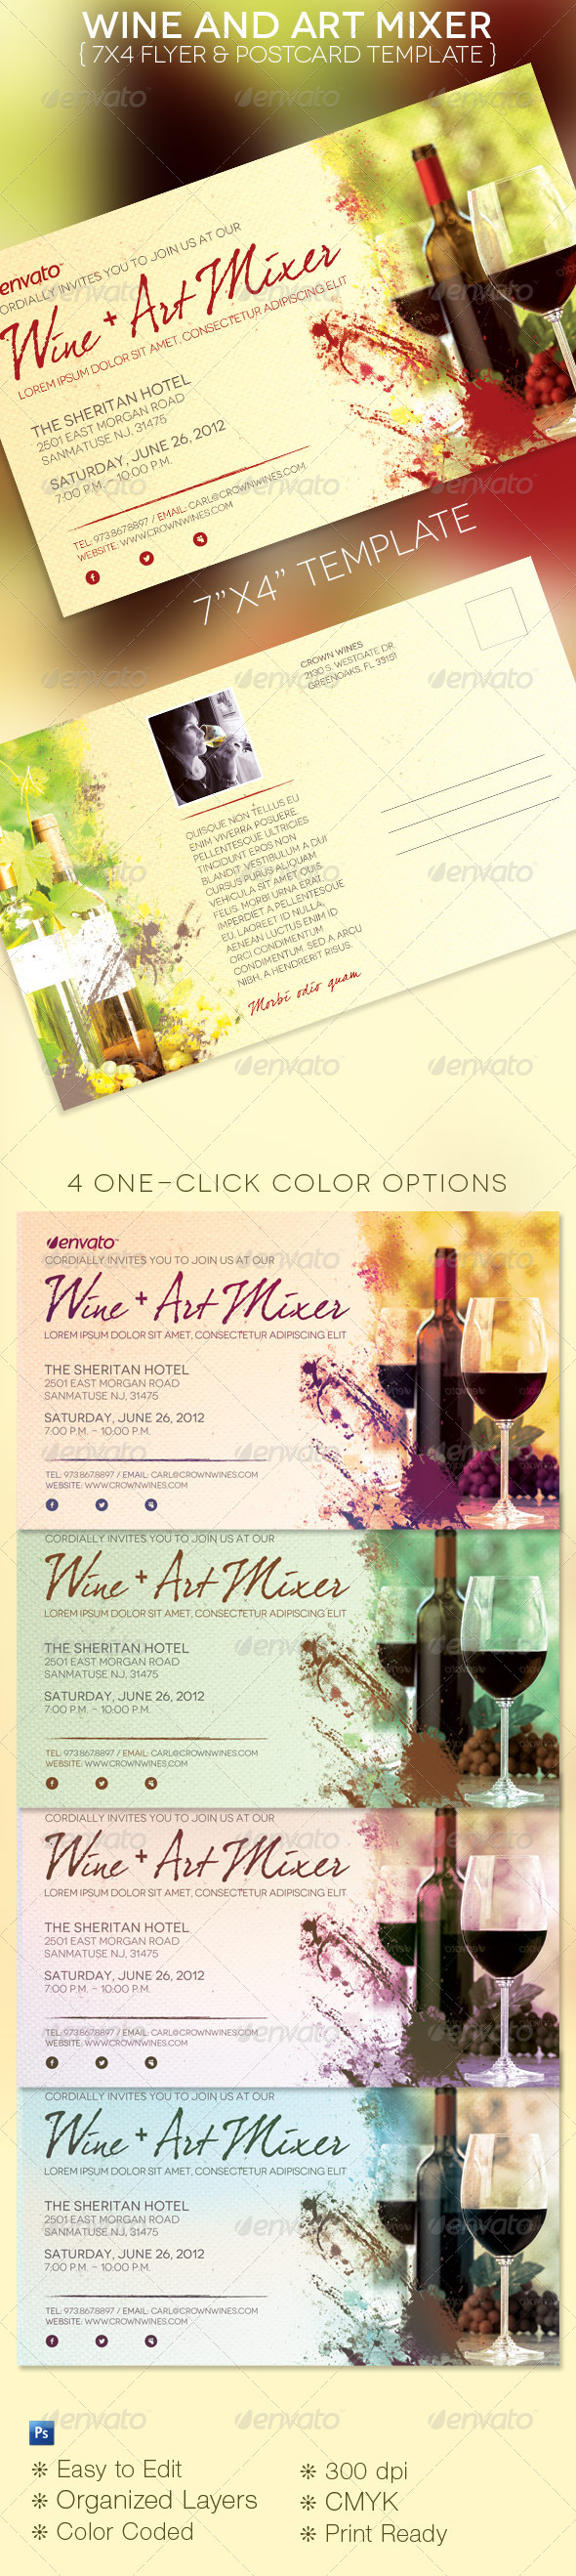 Wine and Art Mixer Flyer Template